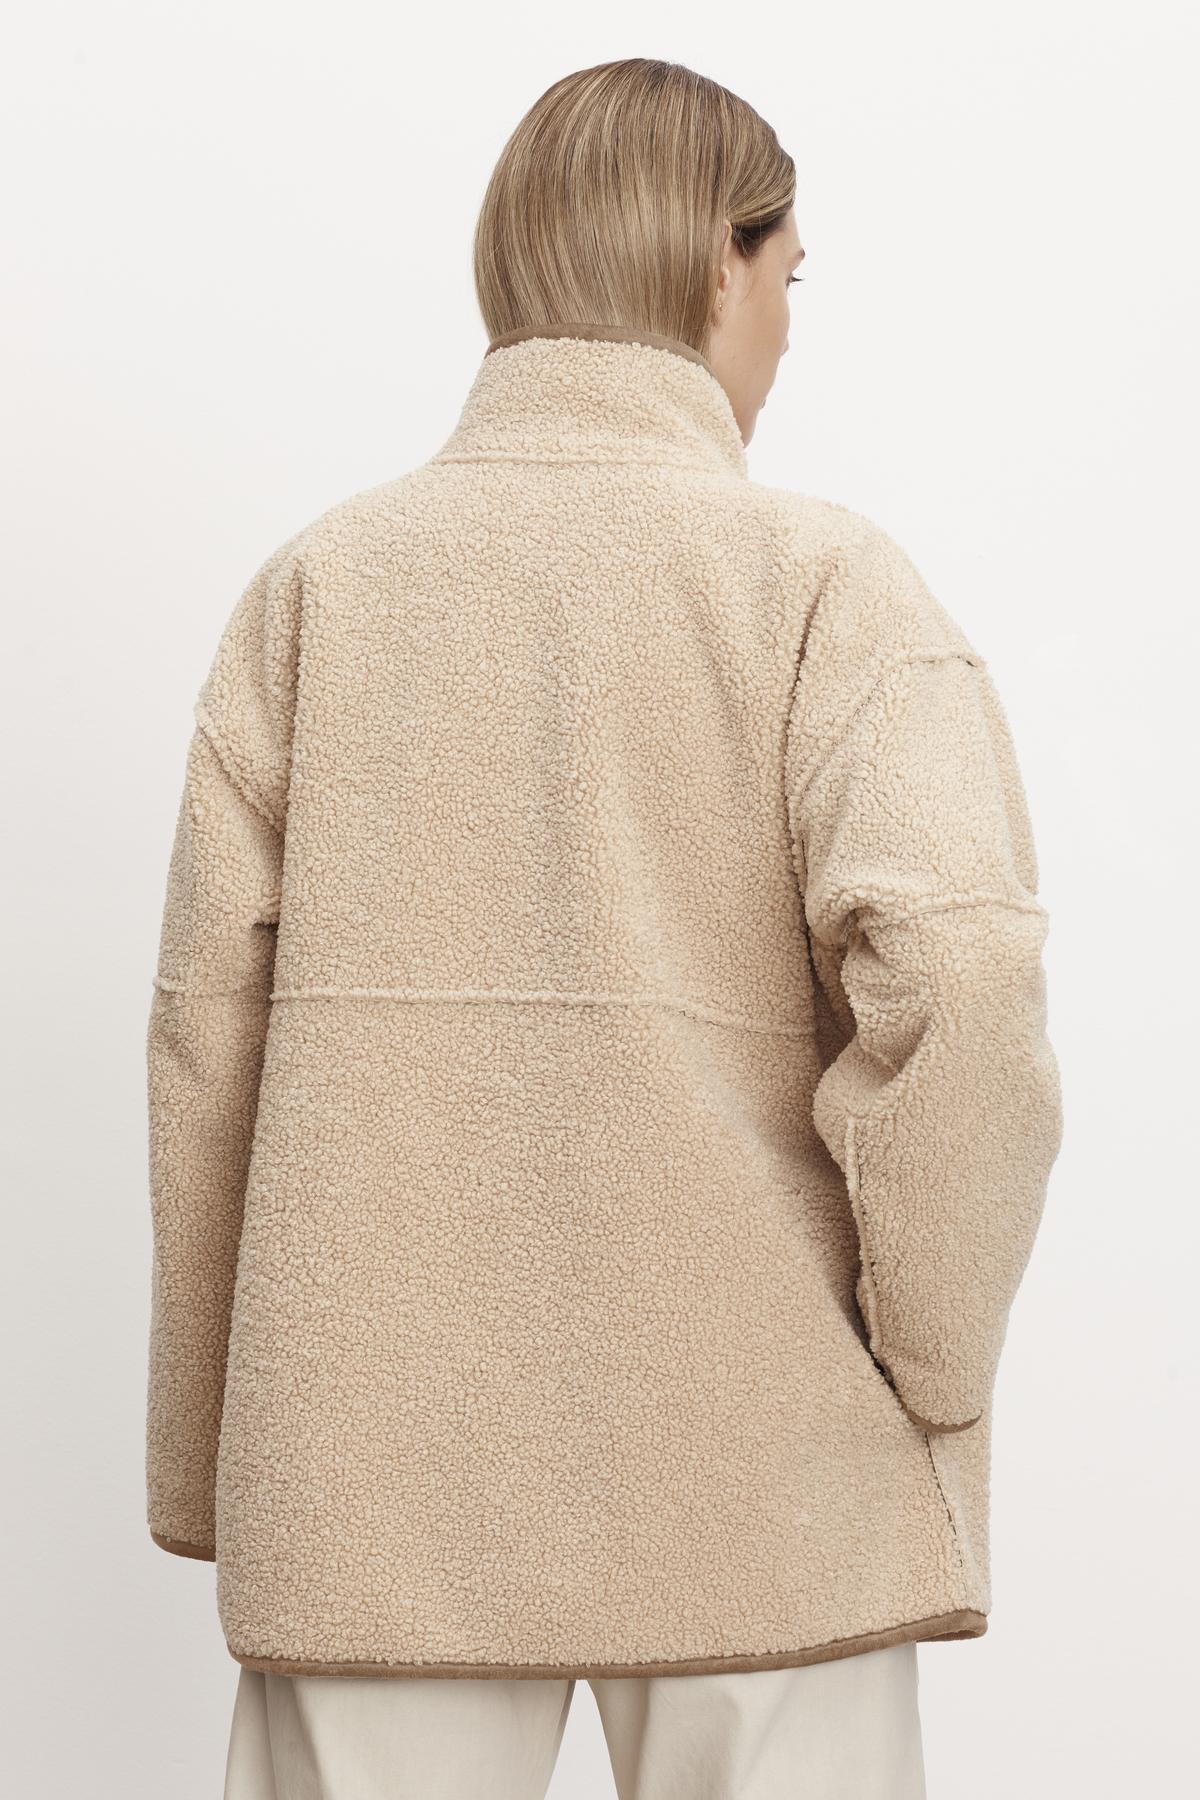   The relaxed silhouette of a woman wearing the ALBANY LUX SHERPA REVERSIBLE JACKET from Velvet by Graham & Spencer. 